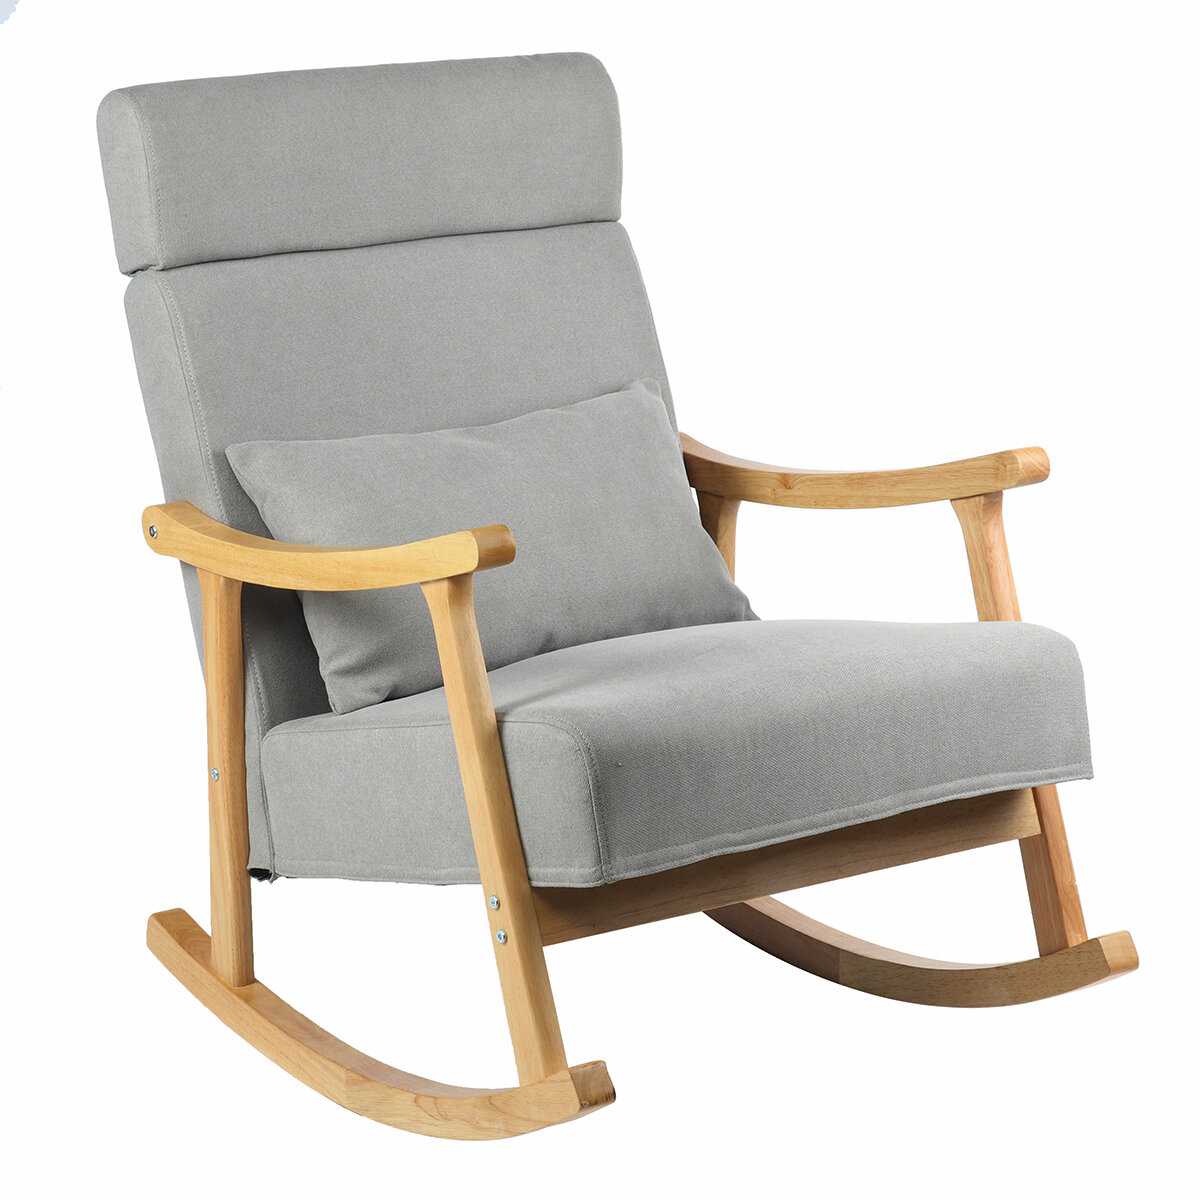 Image of Upholstered Rocking Chair Recliner Armchair w/Thick Padded Seat Lumbar